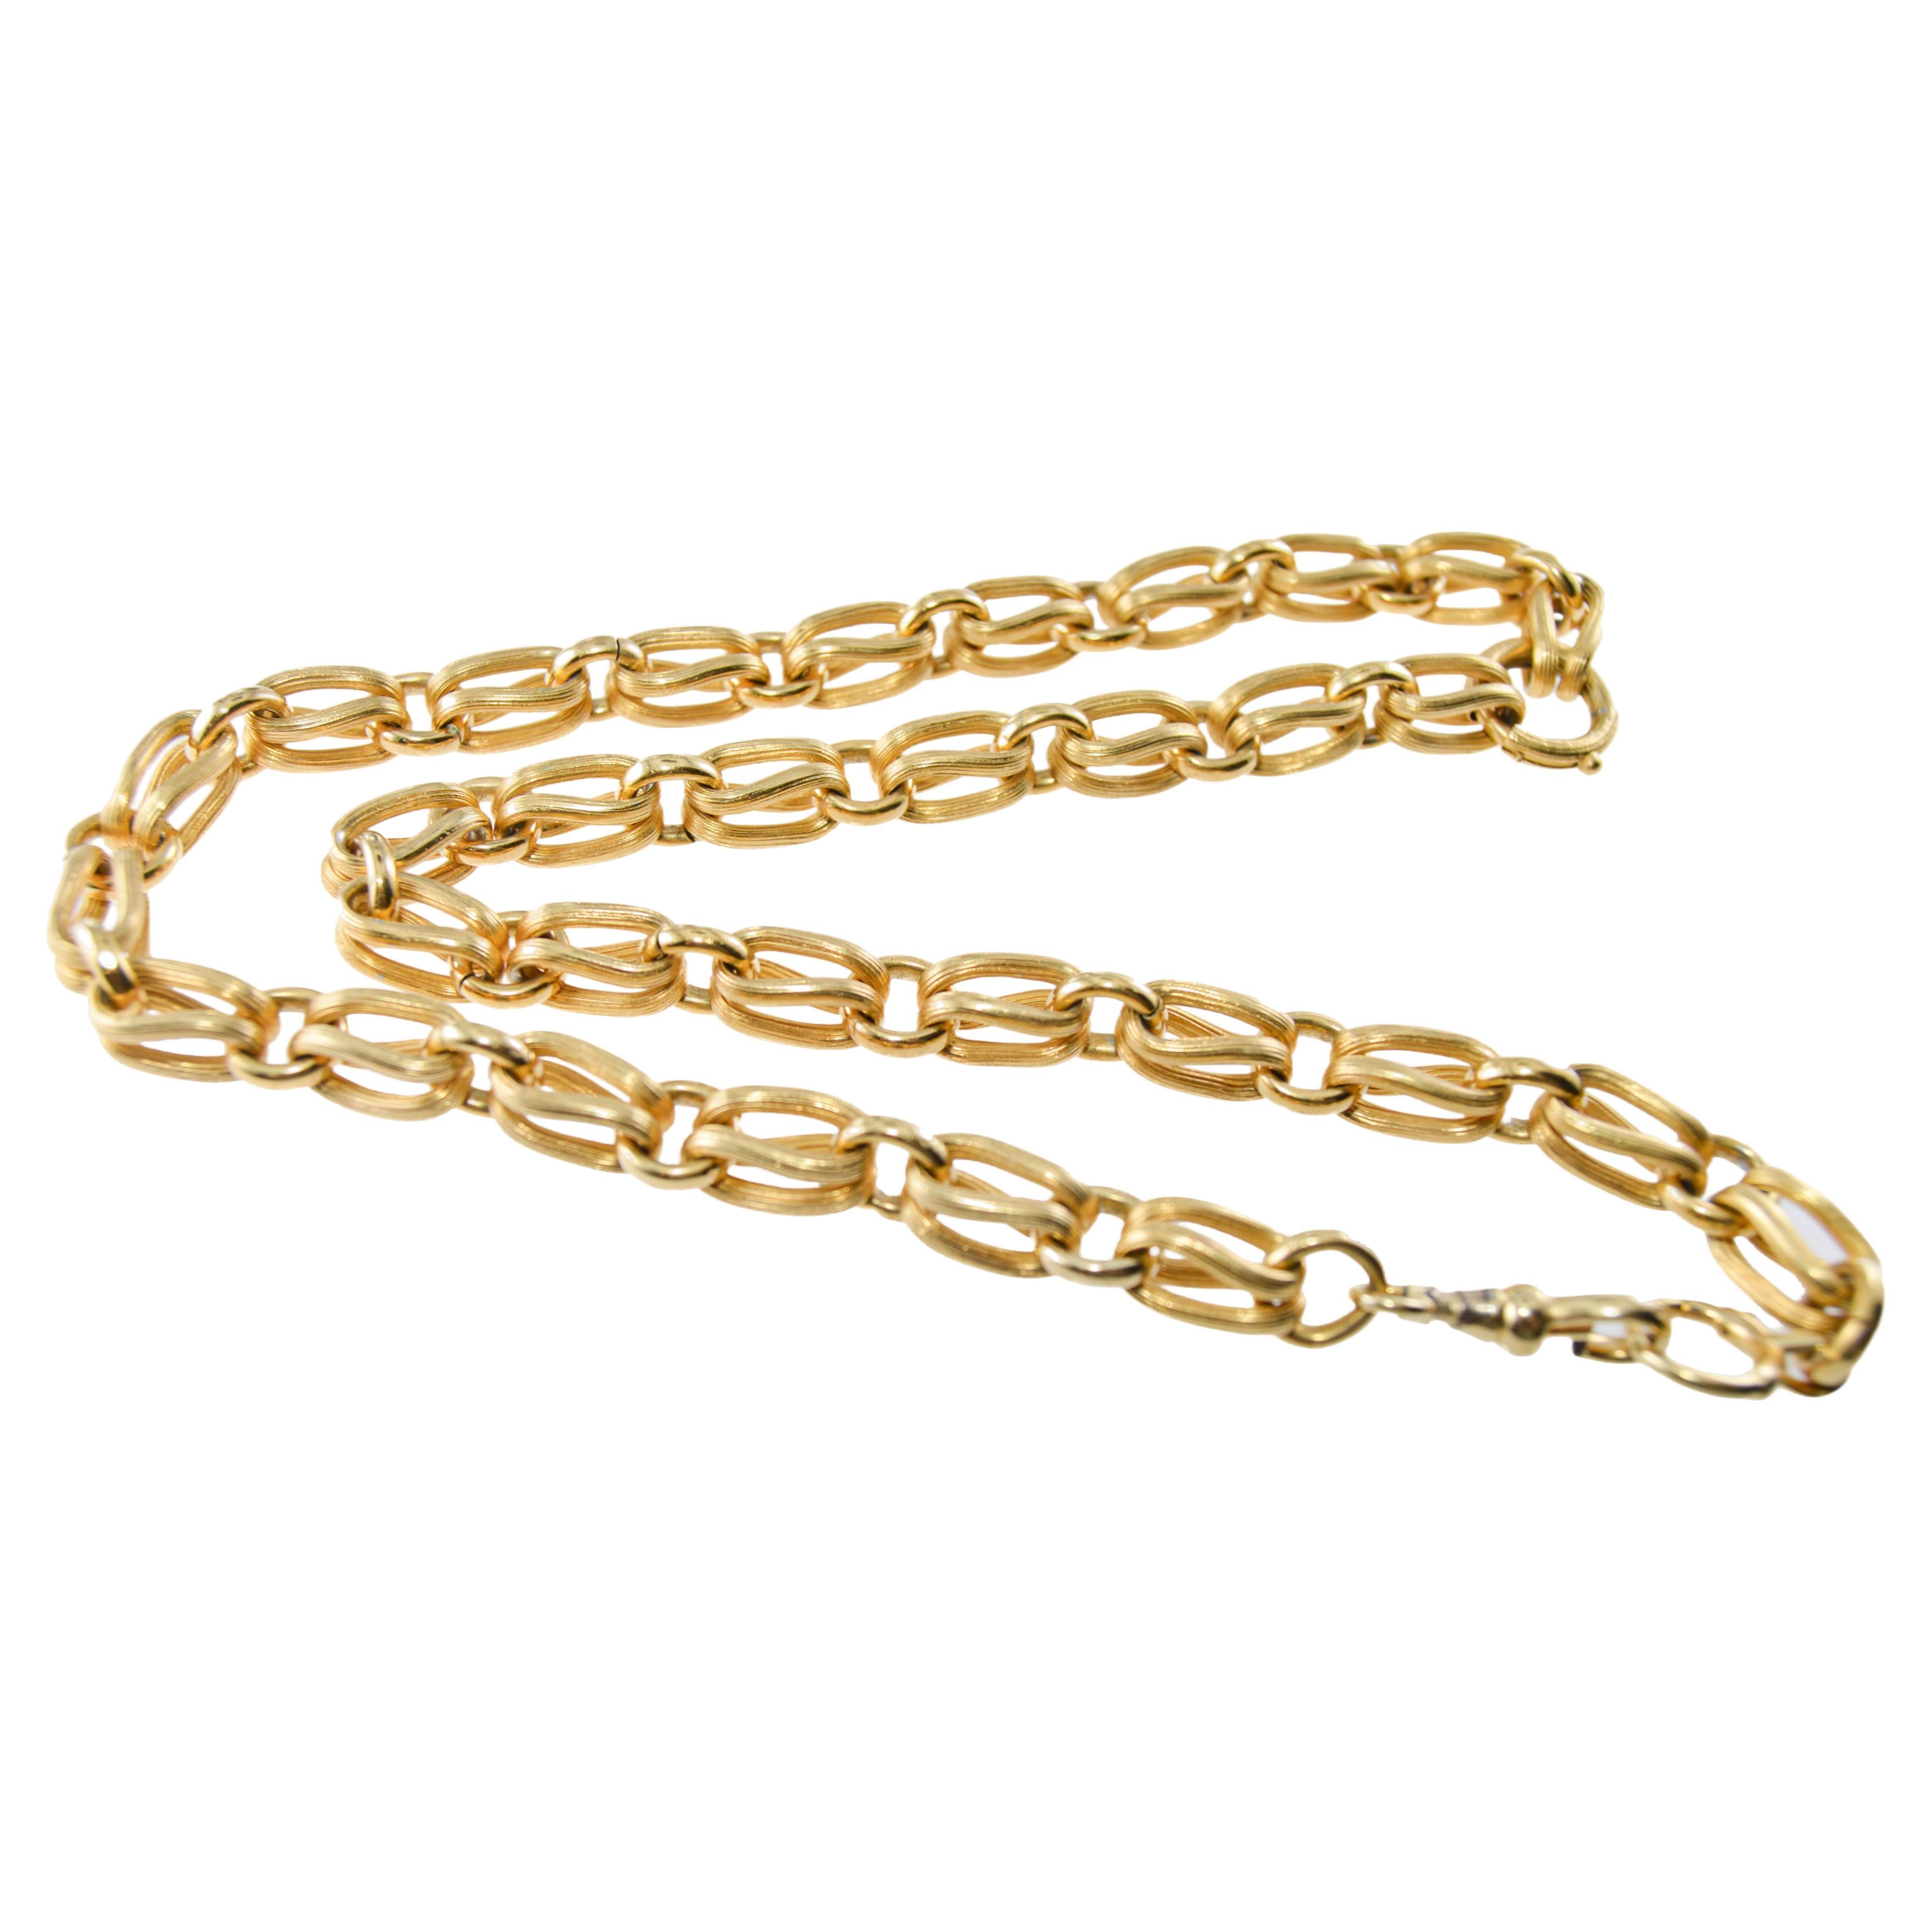 METAL / MATERIAL: Yellow Gold Filled 
CIRCA / YEAR: 1920's
DIMENSIONS / SIZE: 21 Inches Total Length / 3/8 Thick  

This is a very unique Pocket Watch Chain set up as two chains. It can be worn with a pocket watch or for two pocket watches, or as a